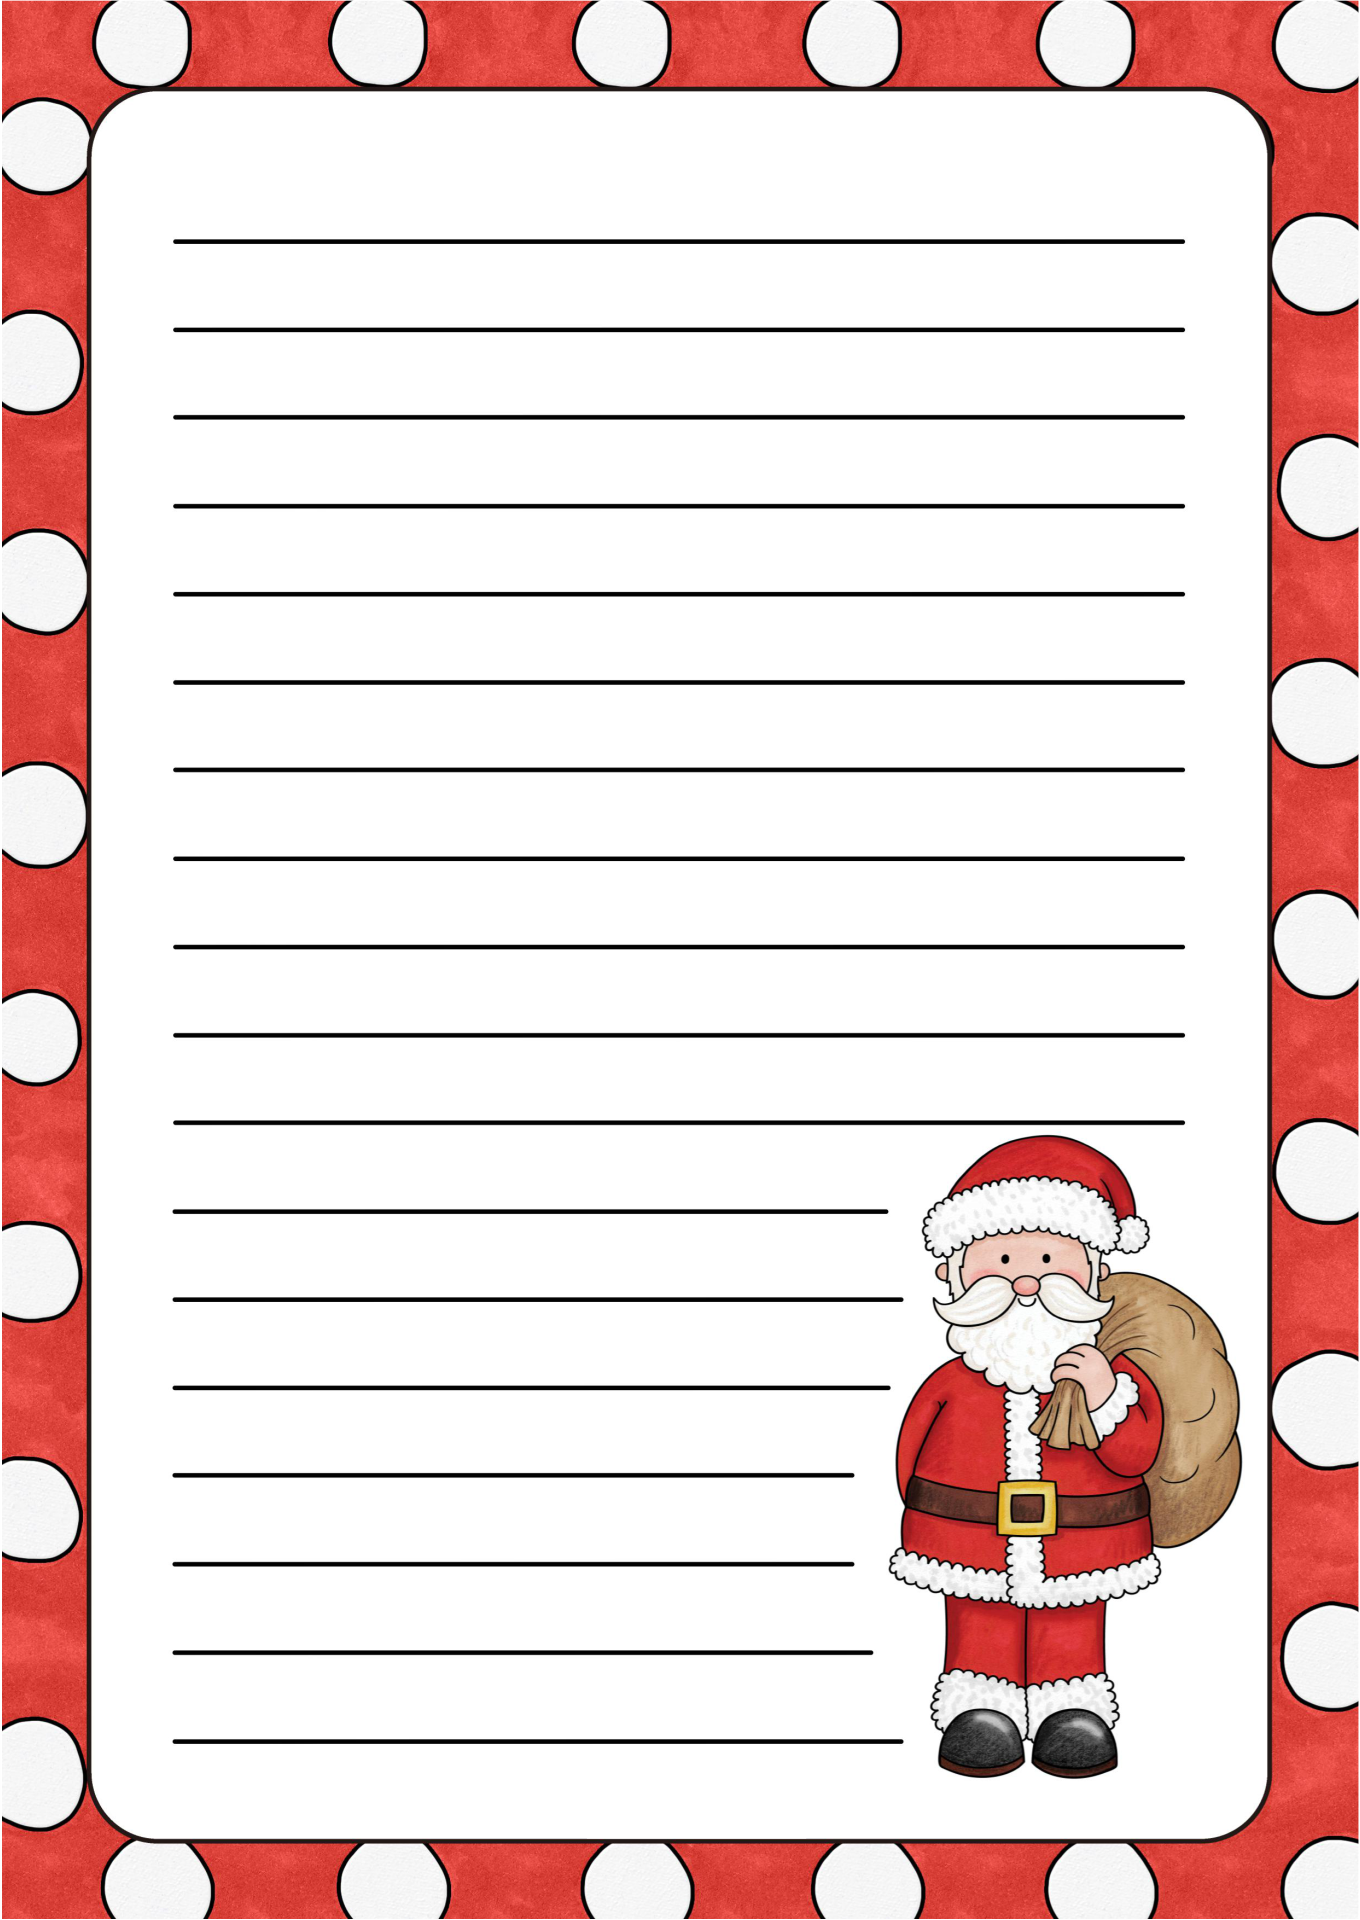 Printable Christmas Letter Writing Paper - Discover the Beauty of ...